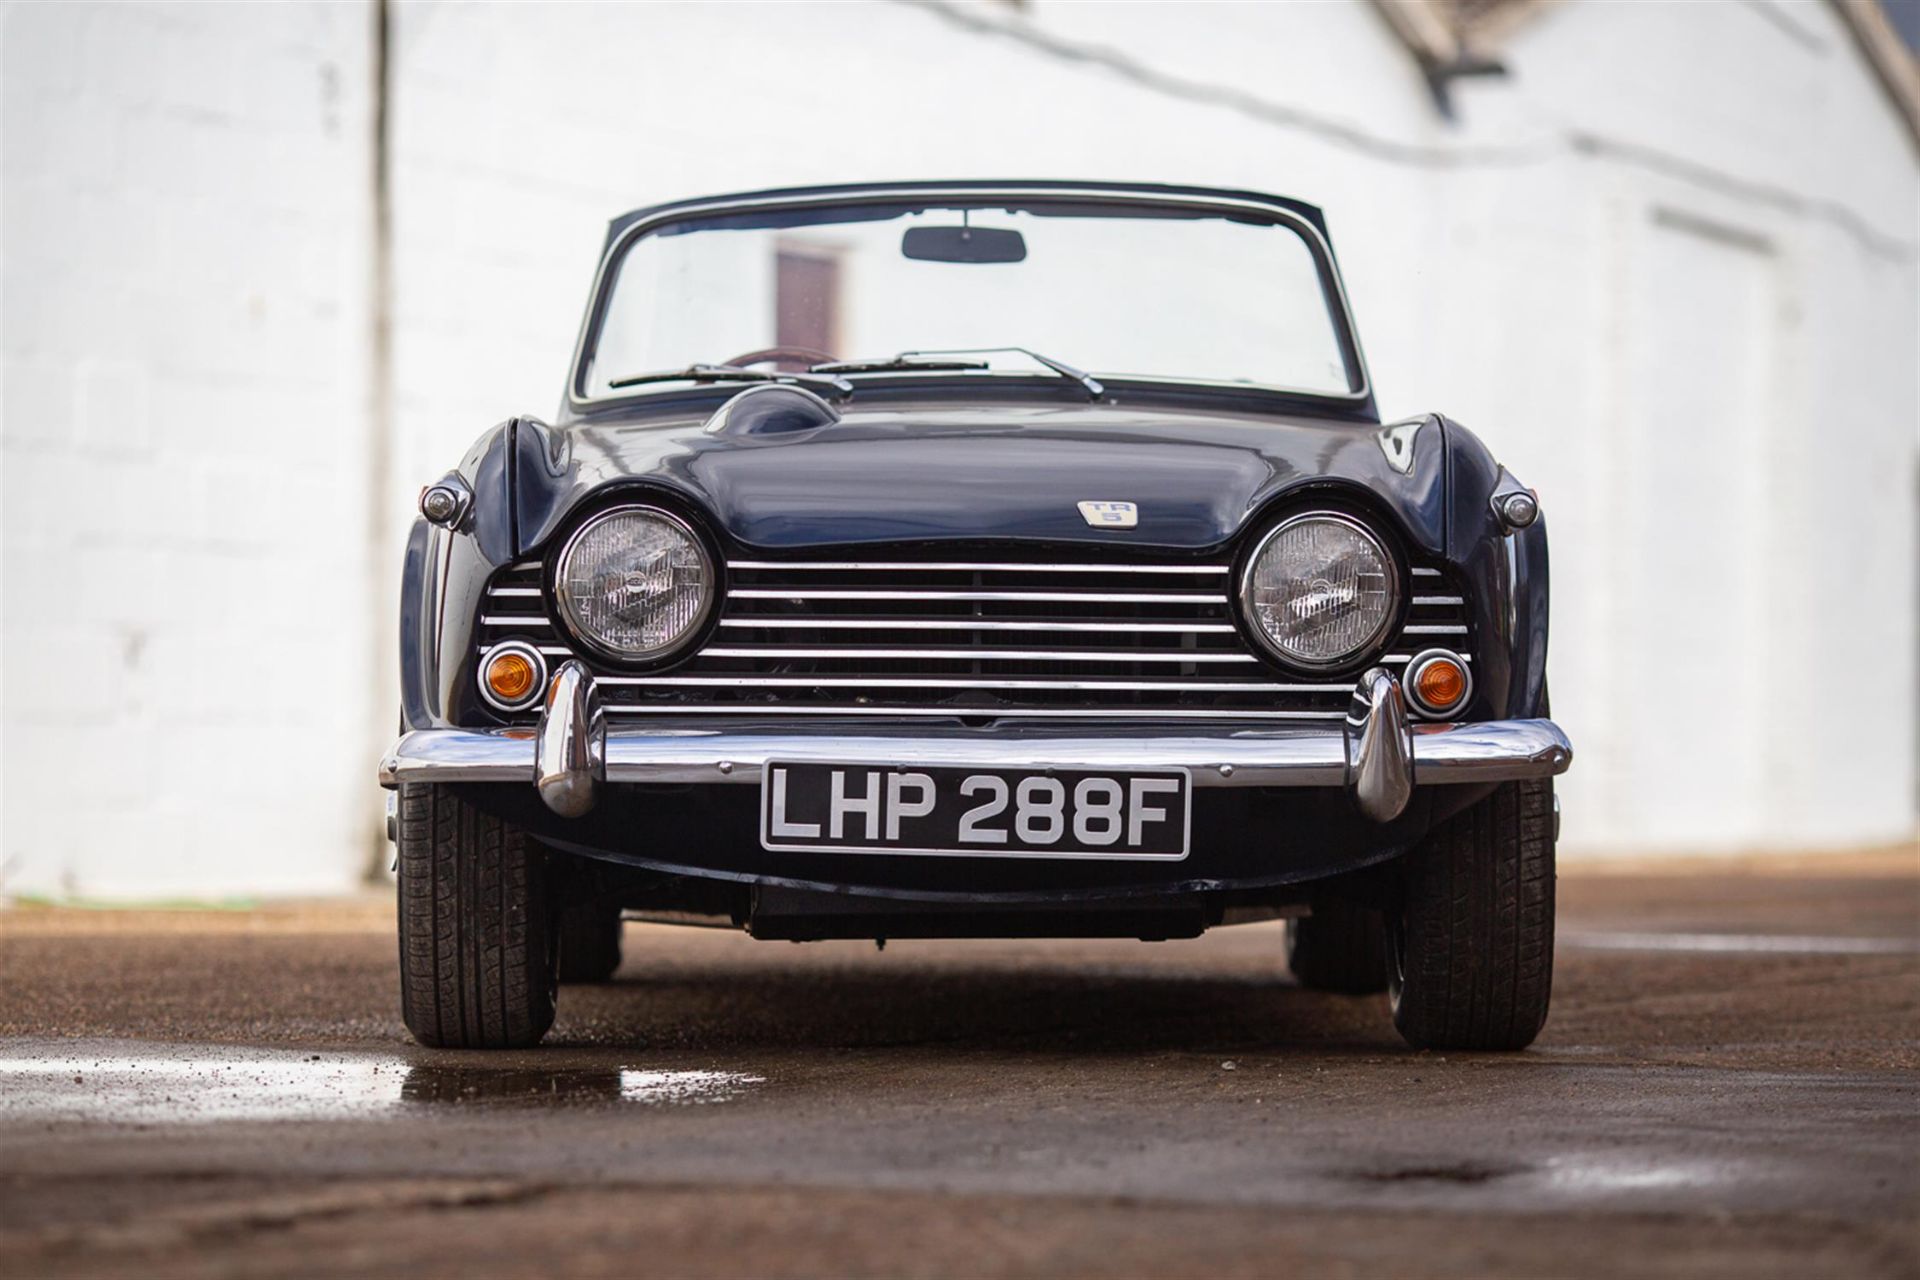 1967 Triumph TR5 - The First Ever TR5 - Image 6 of 10